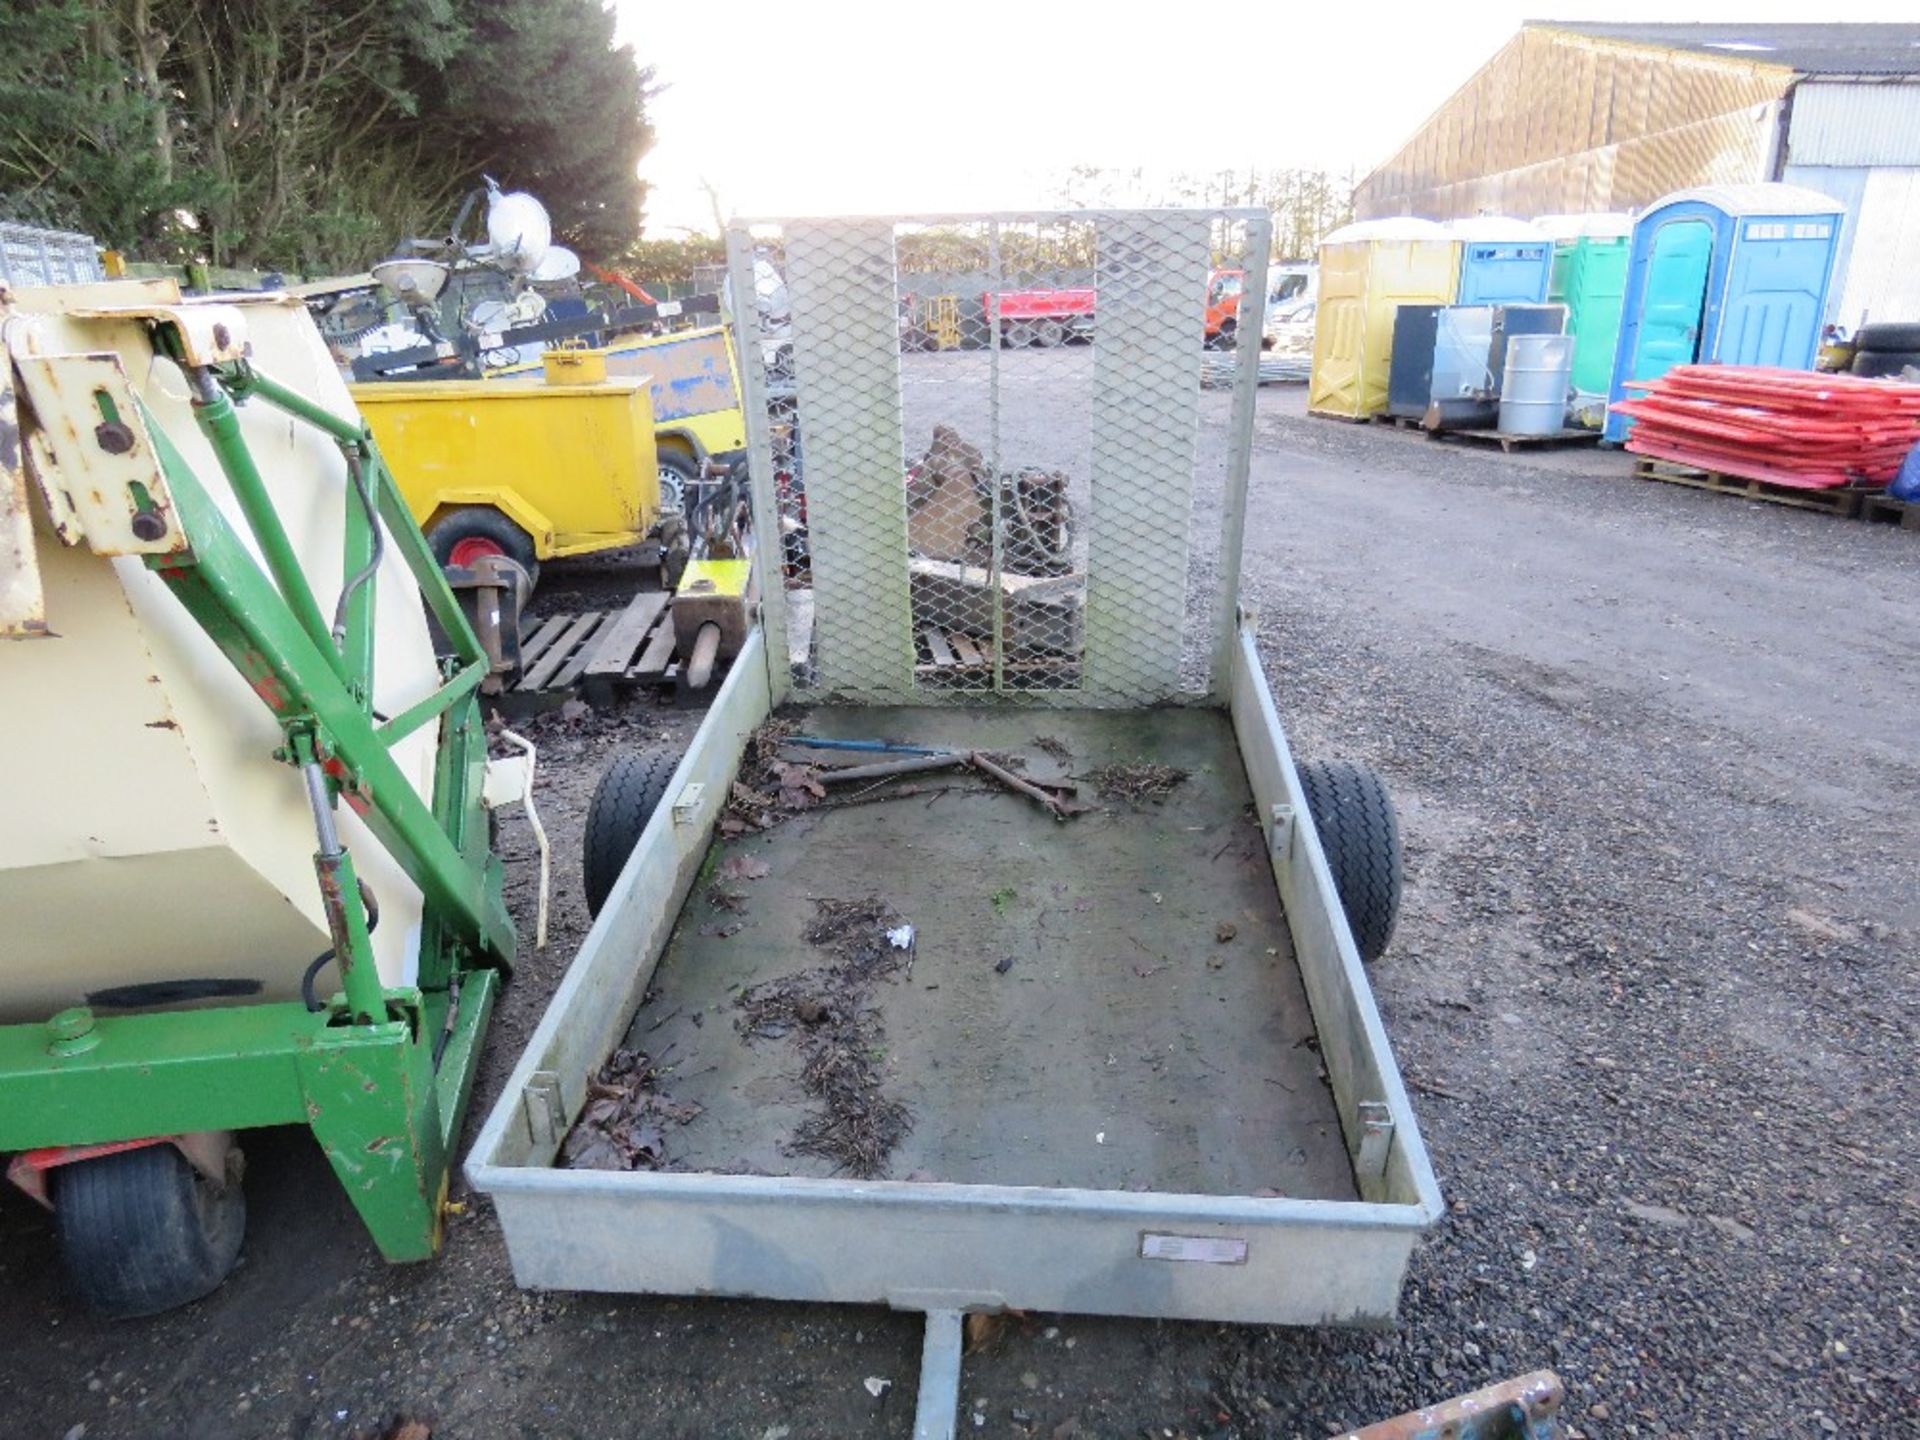 SMALL SIZED TRAILER FOR MOWER ETC. BED SIZE 6FT X 4FT APPROX. - Image 3 of 3